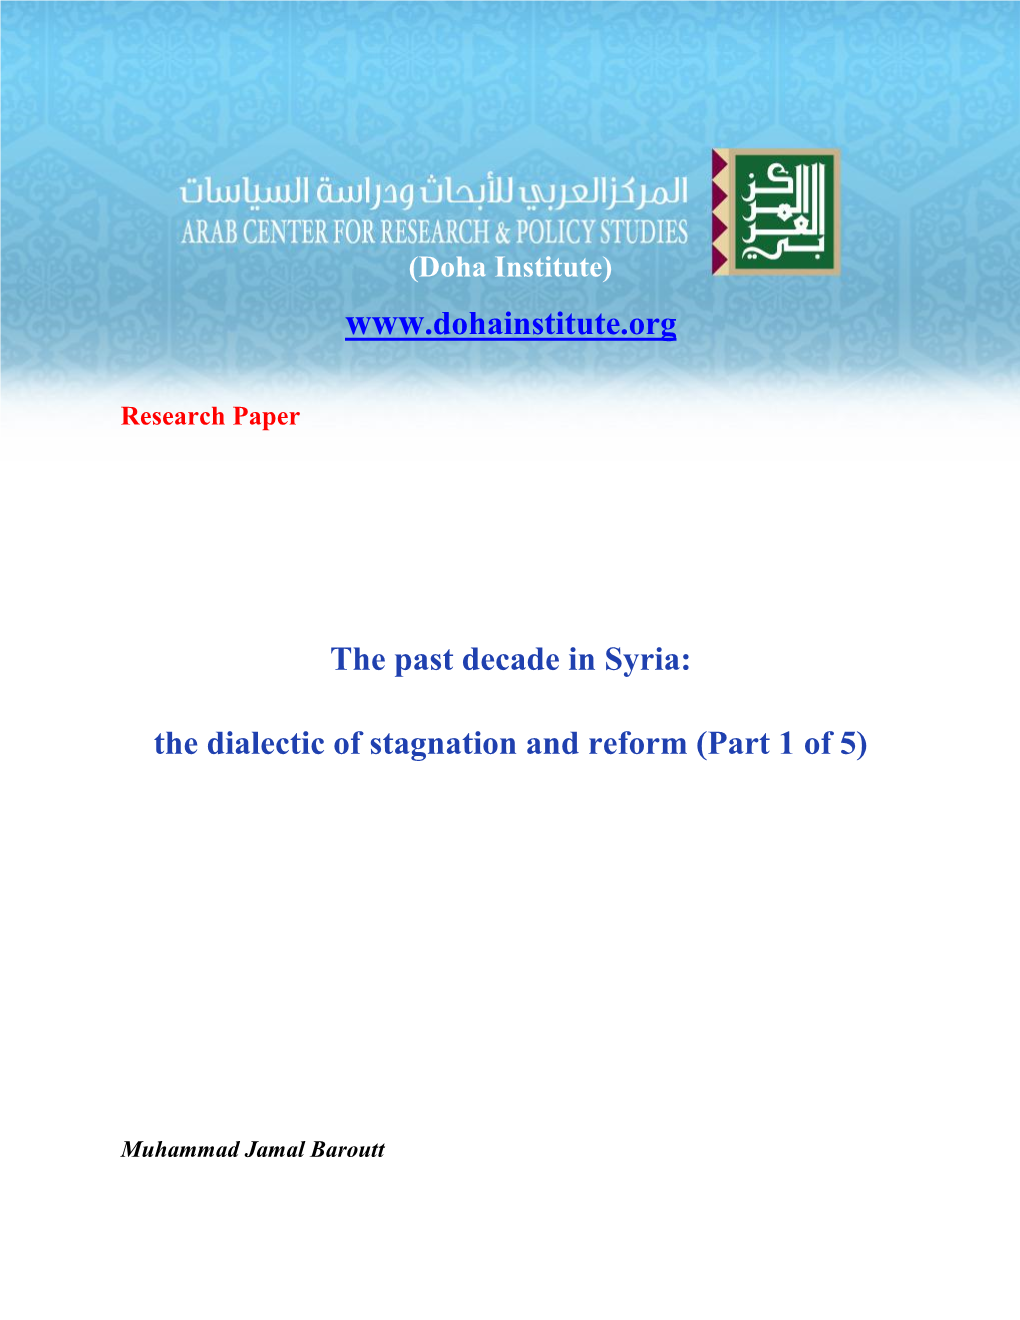 Dohainstitute.Org the Past Decade in Syria: the Dialectic of Stagnation